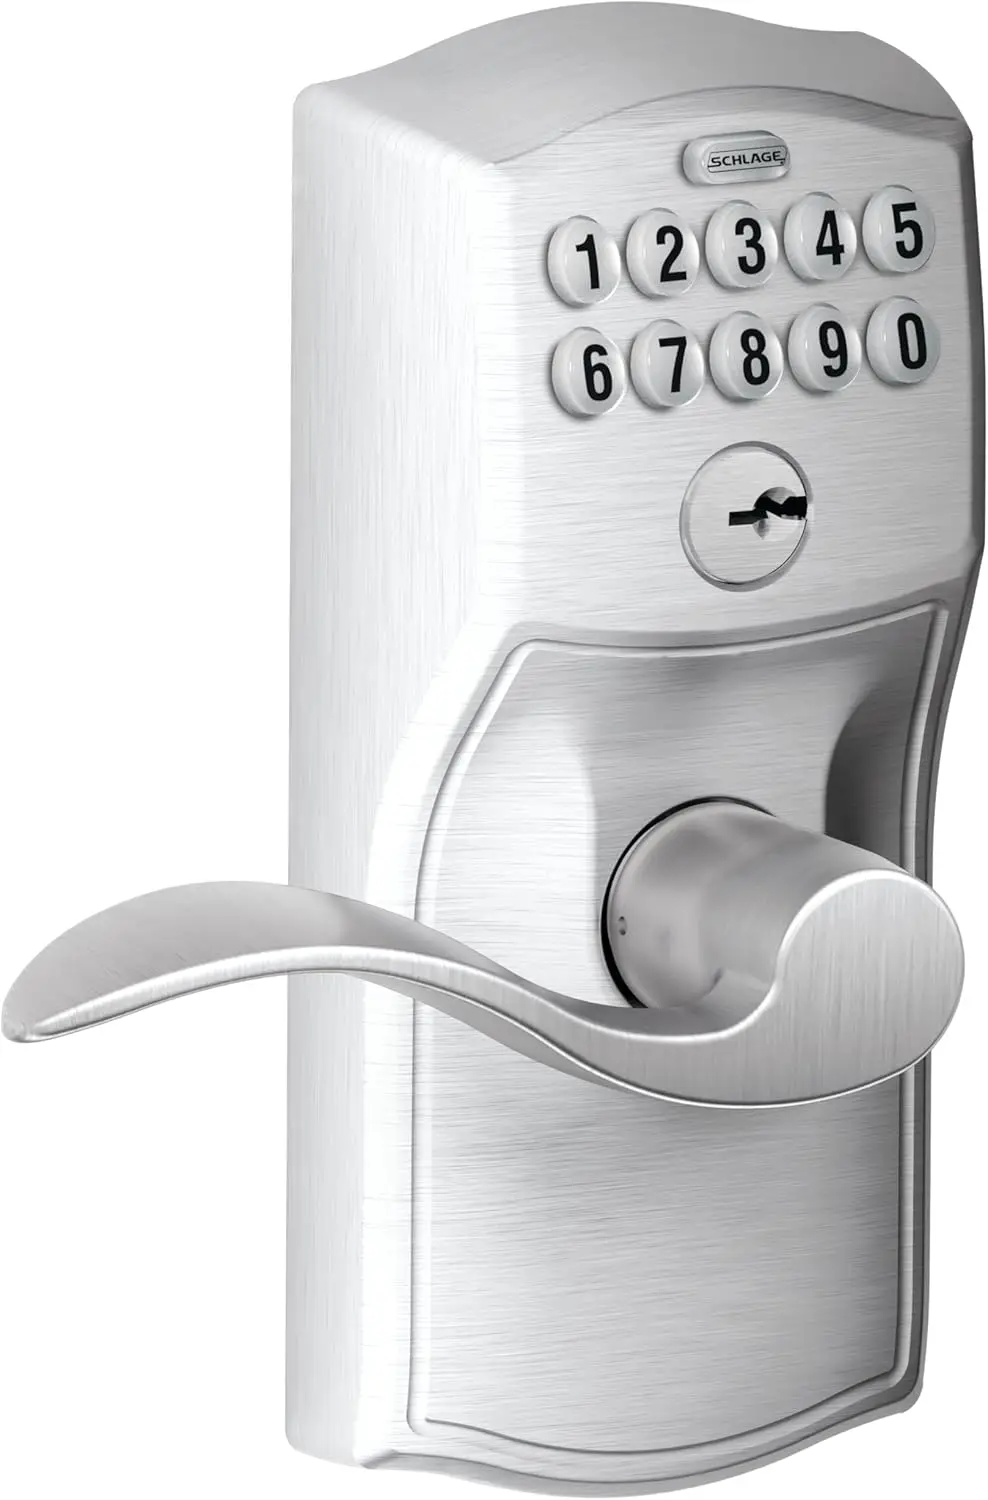 

FE595 CAM 626 ACC Camelot Keypad Entry with Flex-Lock and Accent Levers, Brushed Chrome